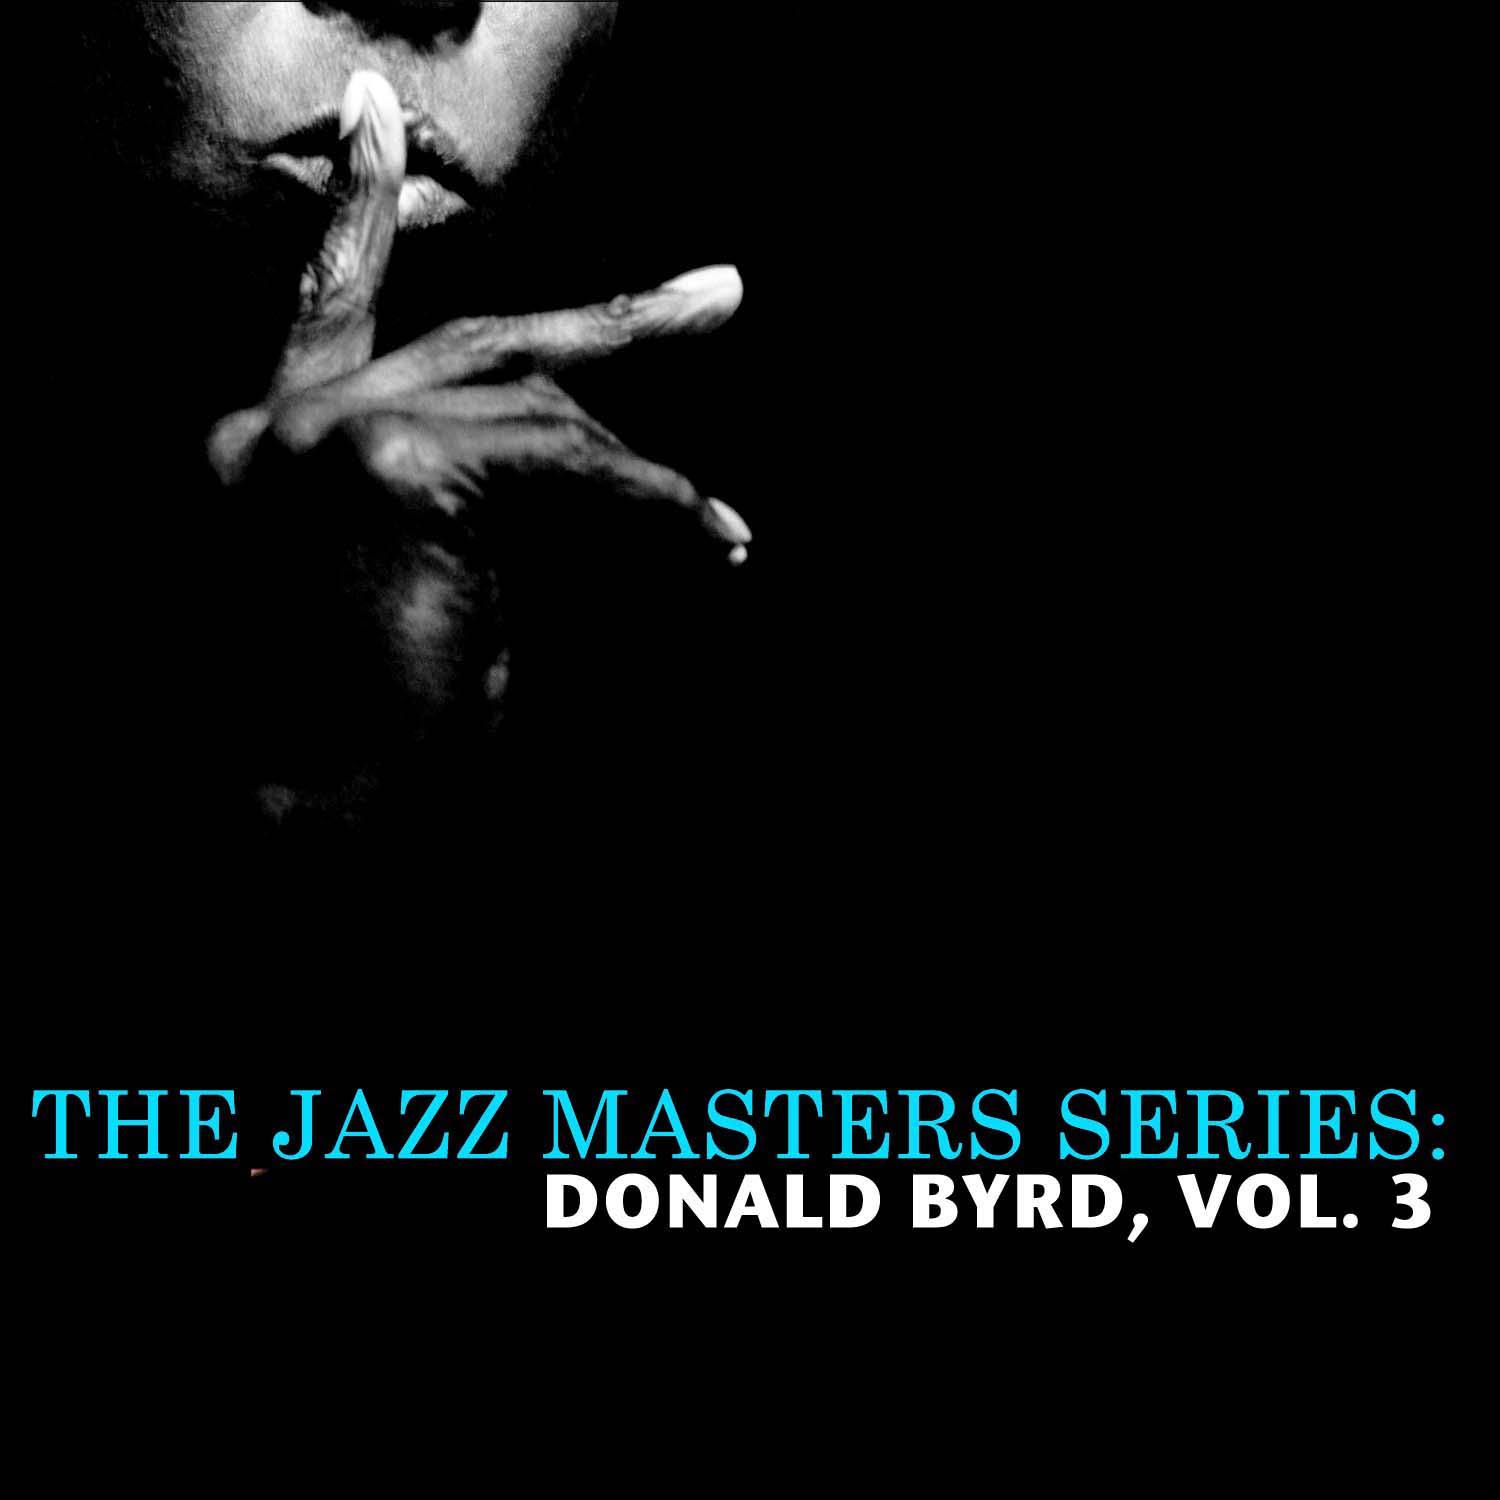 The Jazz Masters Series: Donald Byrd, Vol. 3